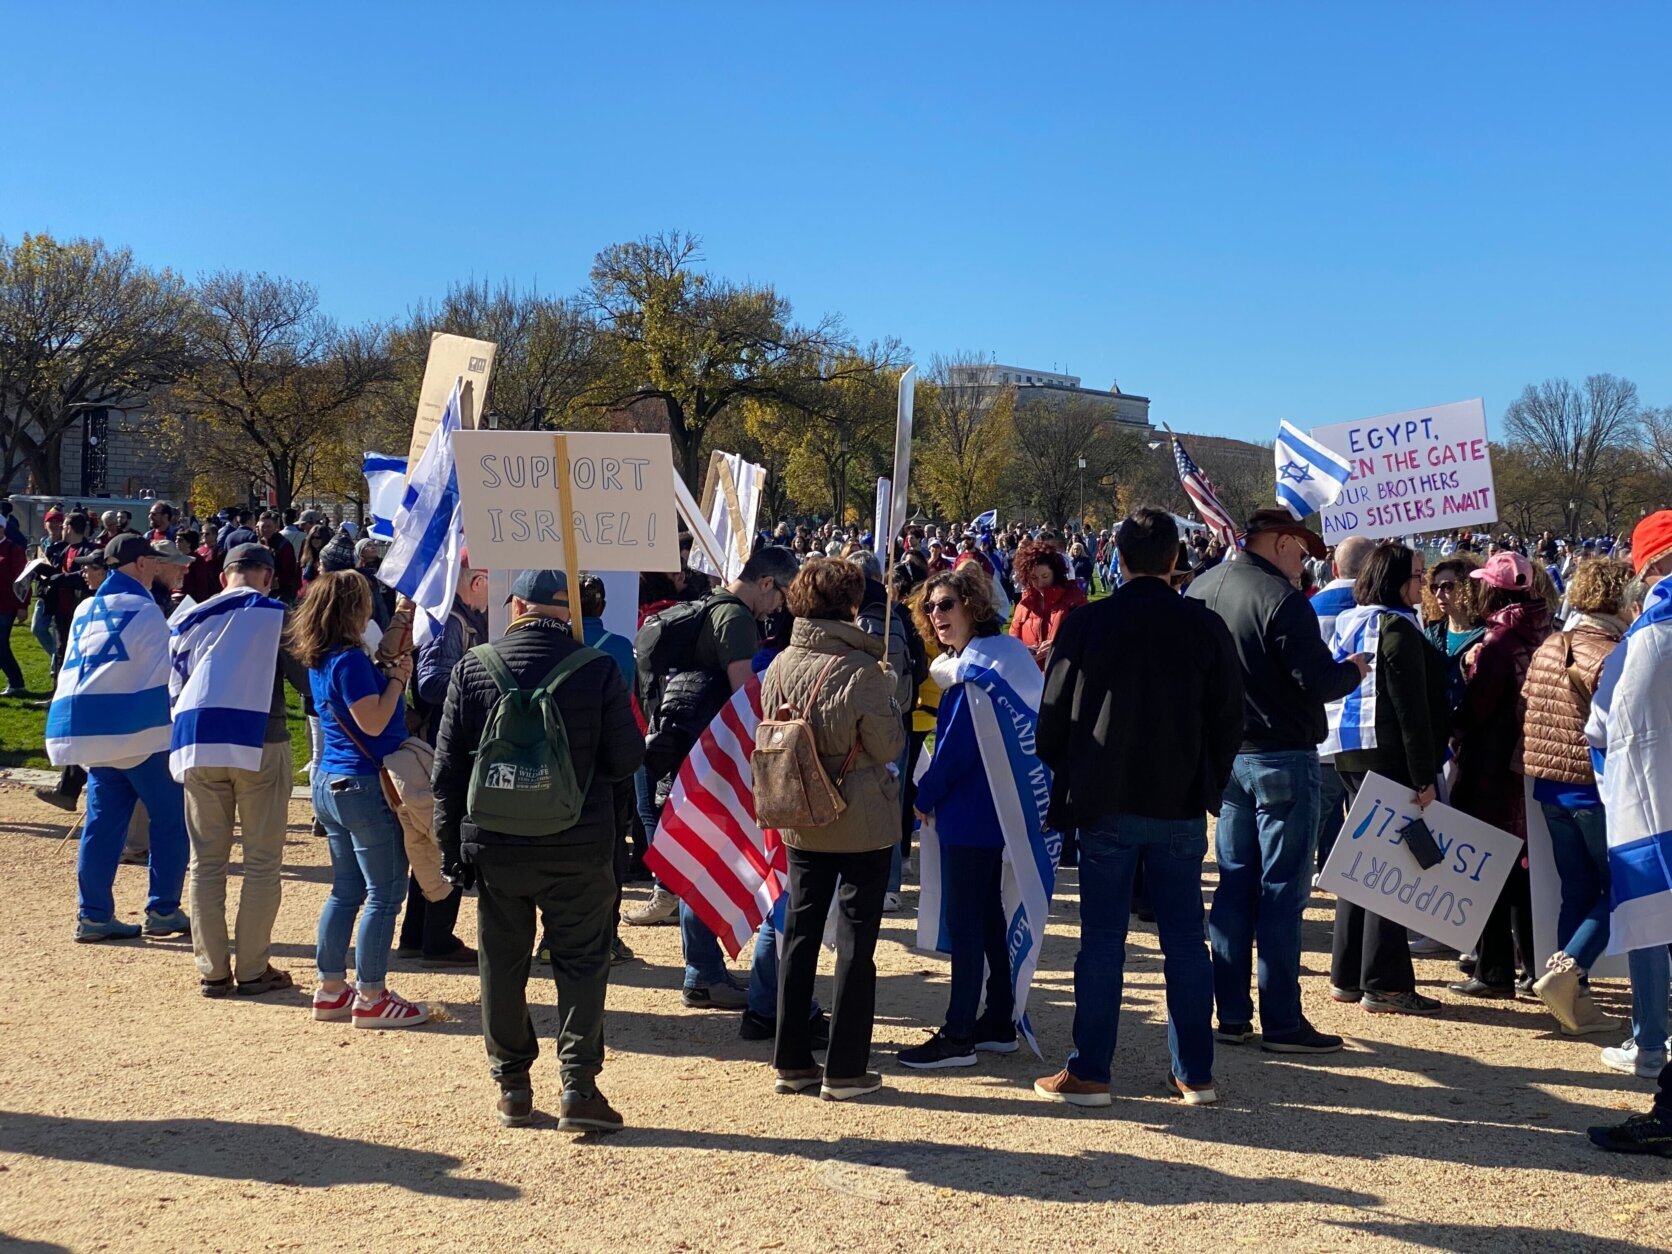 Demonstrations gather with signs that say "Support Israel," some are carrying or wearing flags.